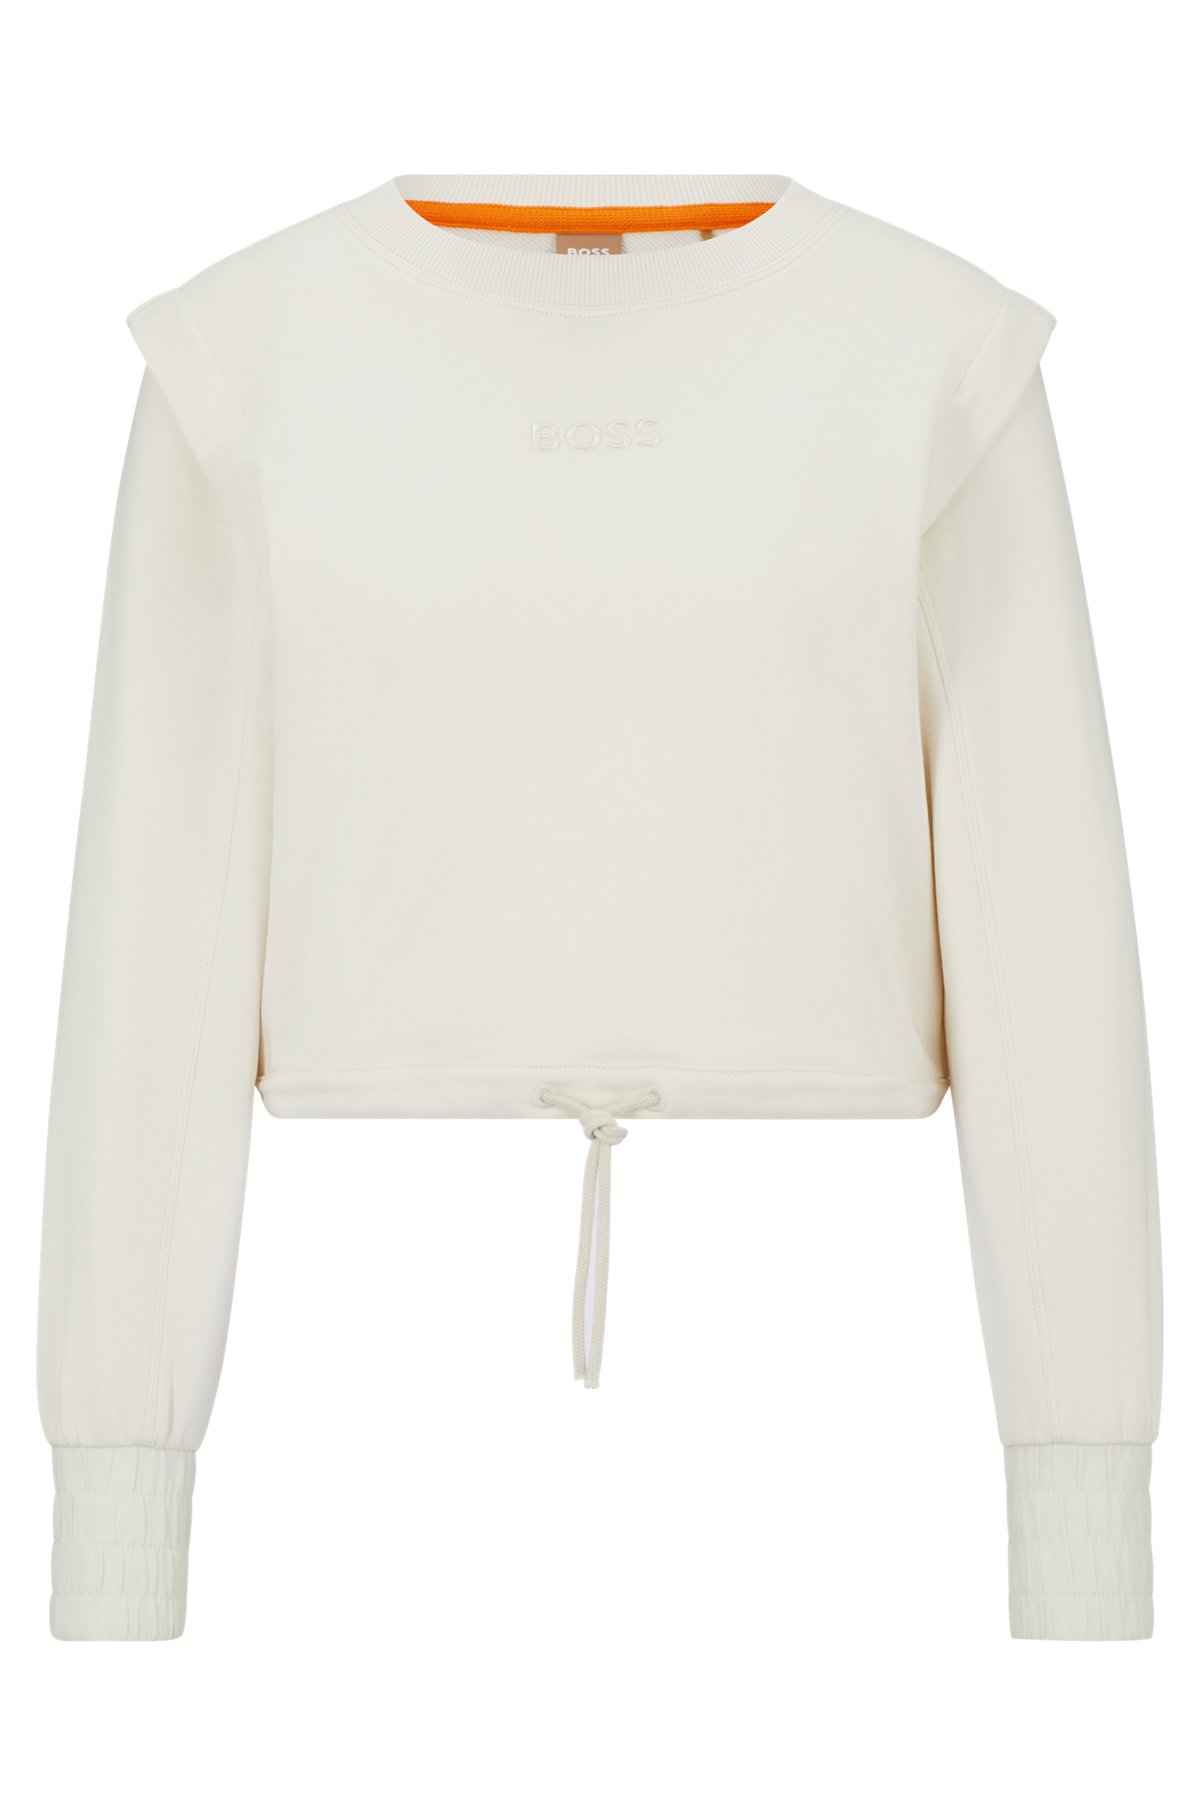 Cropped sweatshirt in cotton with drawstring and embroidered logo, White